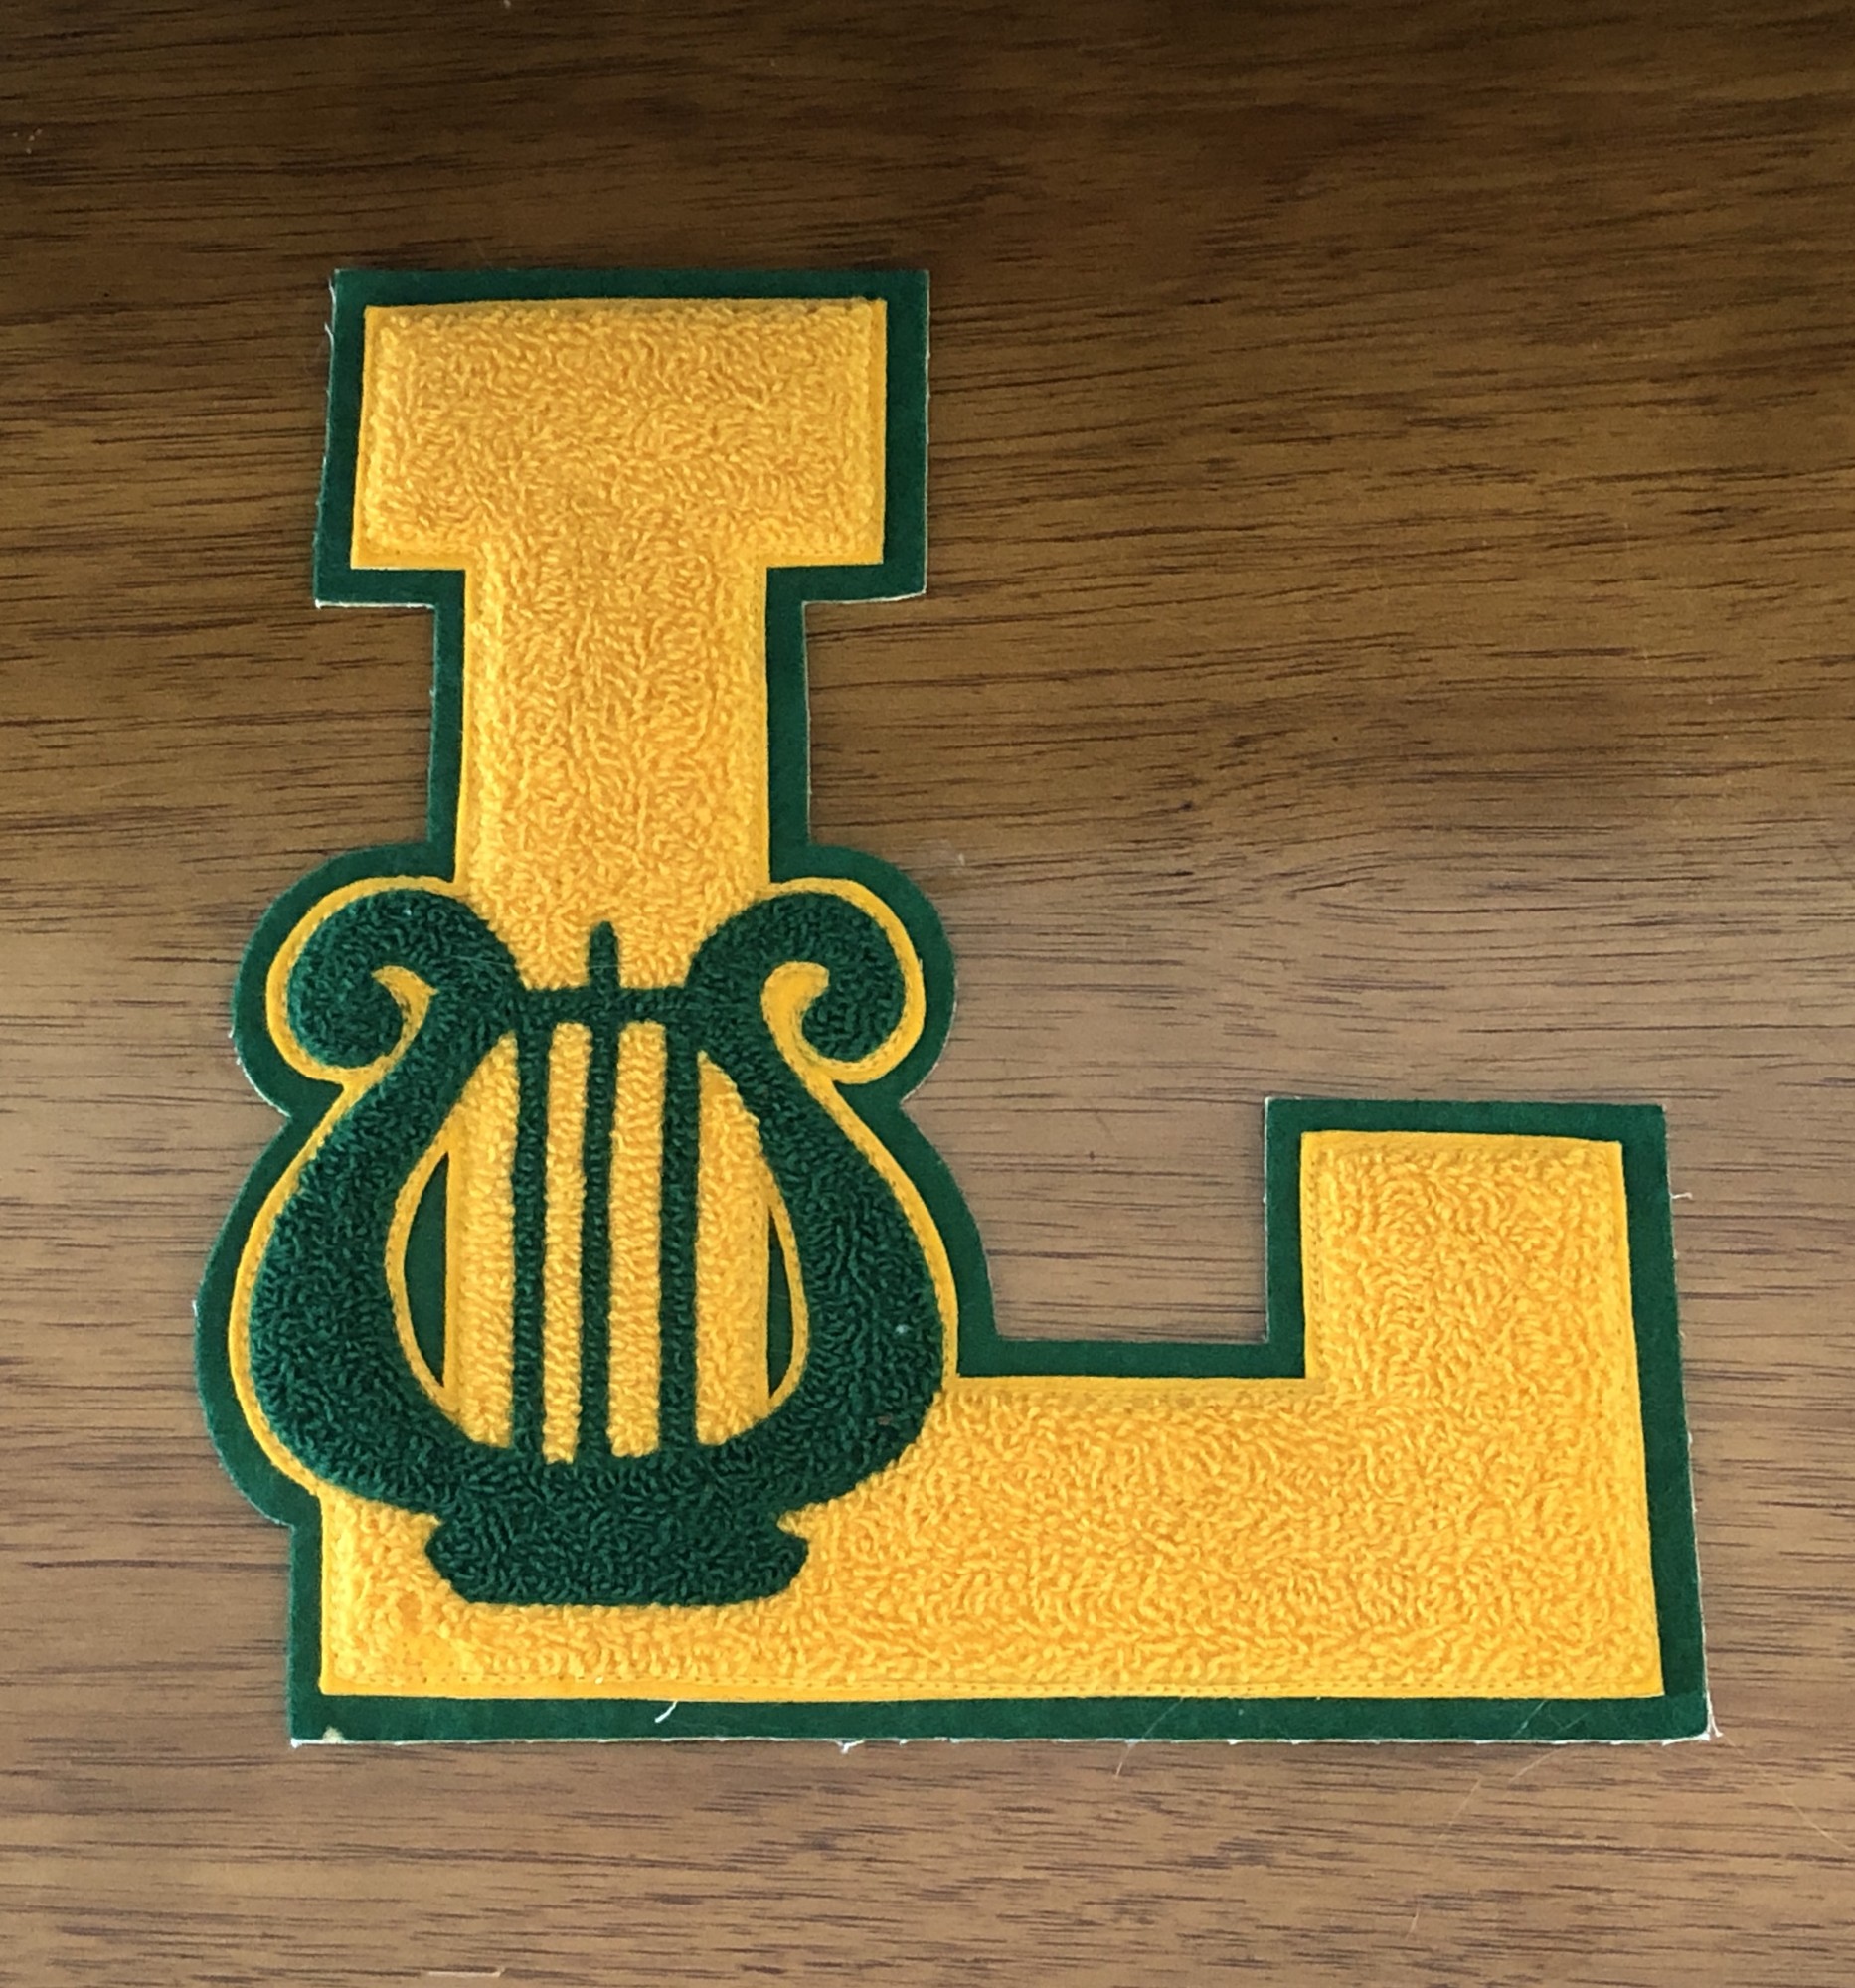 Vintage felt and chenille Letterman Band Letter L, Gold & green, Size: 7x8